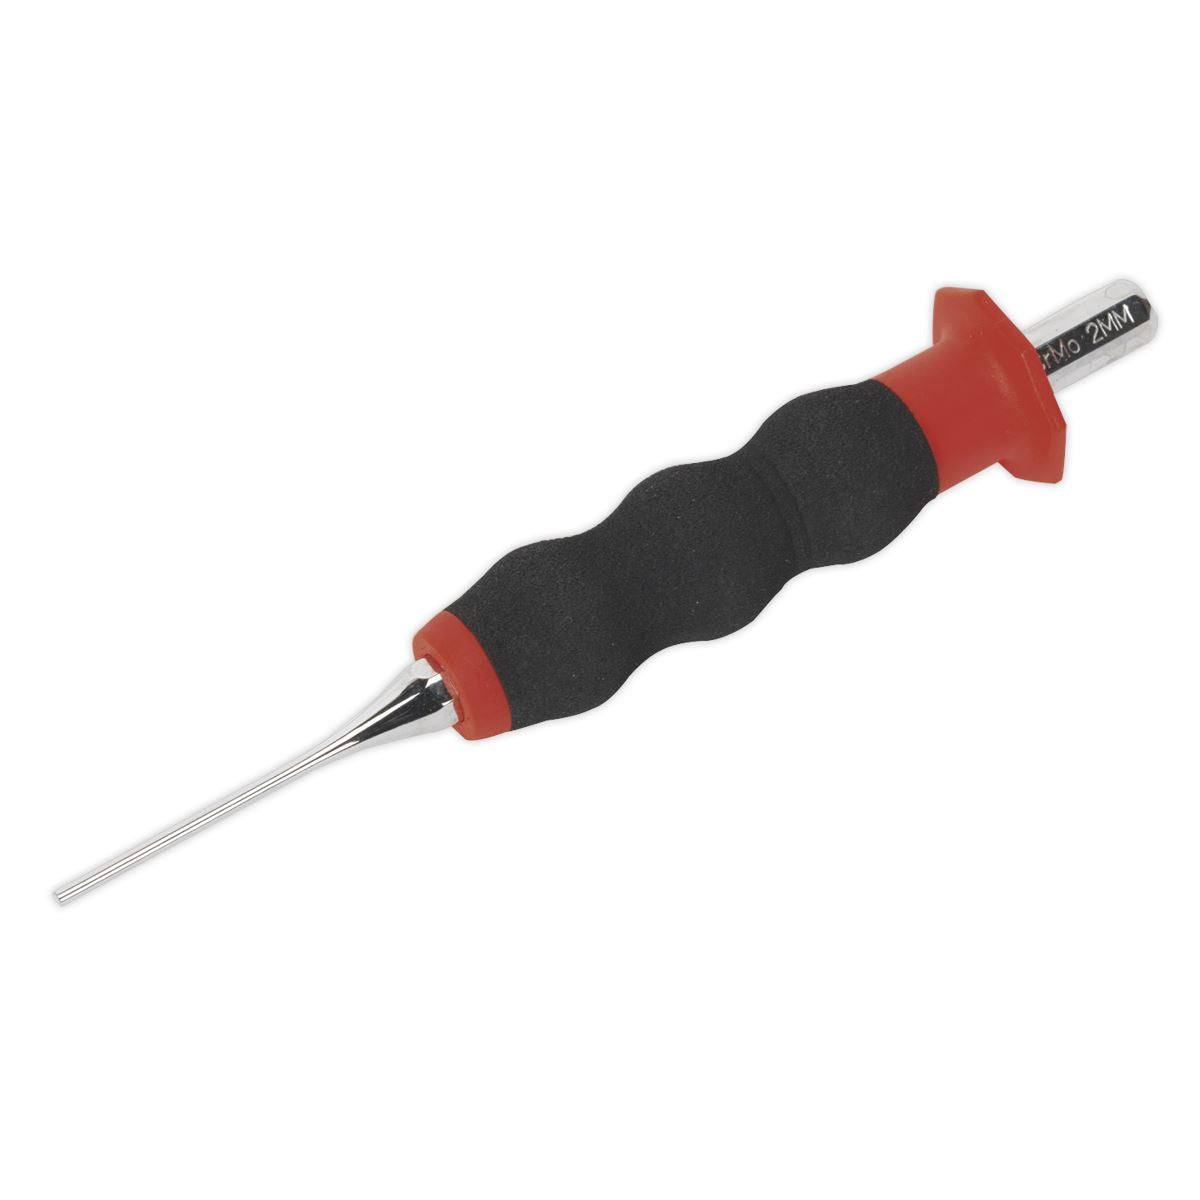 Sealey Premier Sheathed Parallel Pin Punch Ø2mm